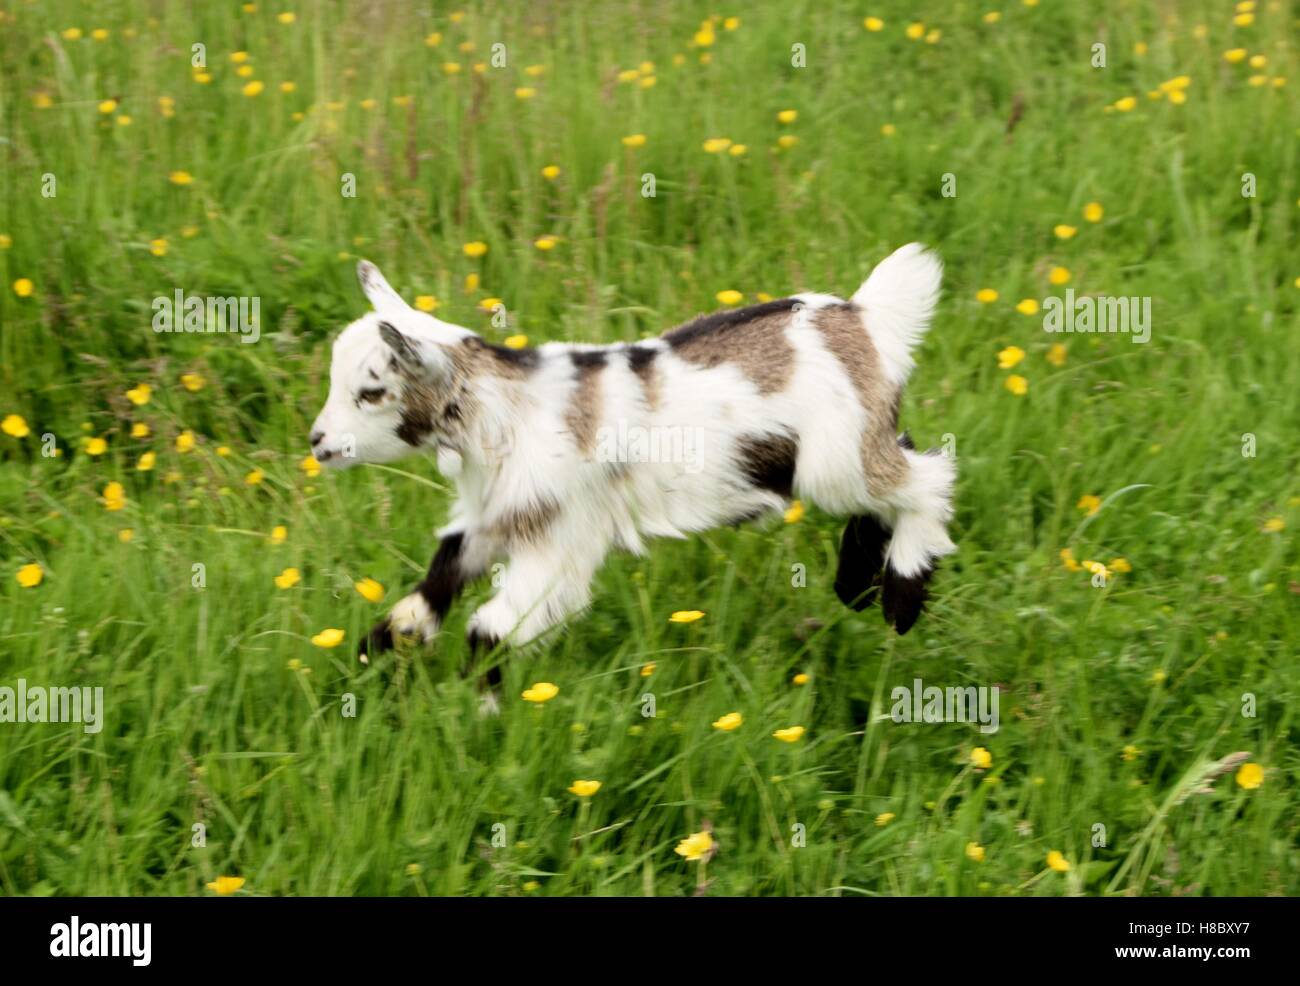 Running and jumping goat kid in our wild flower meadow Stock Photo